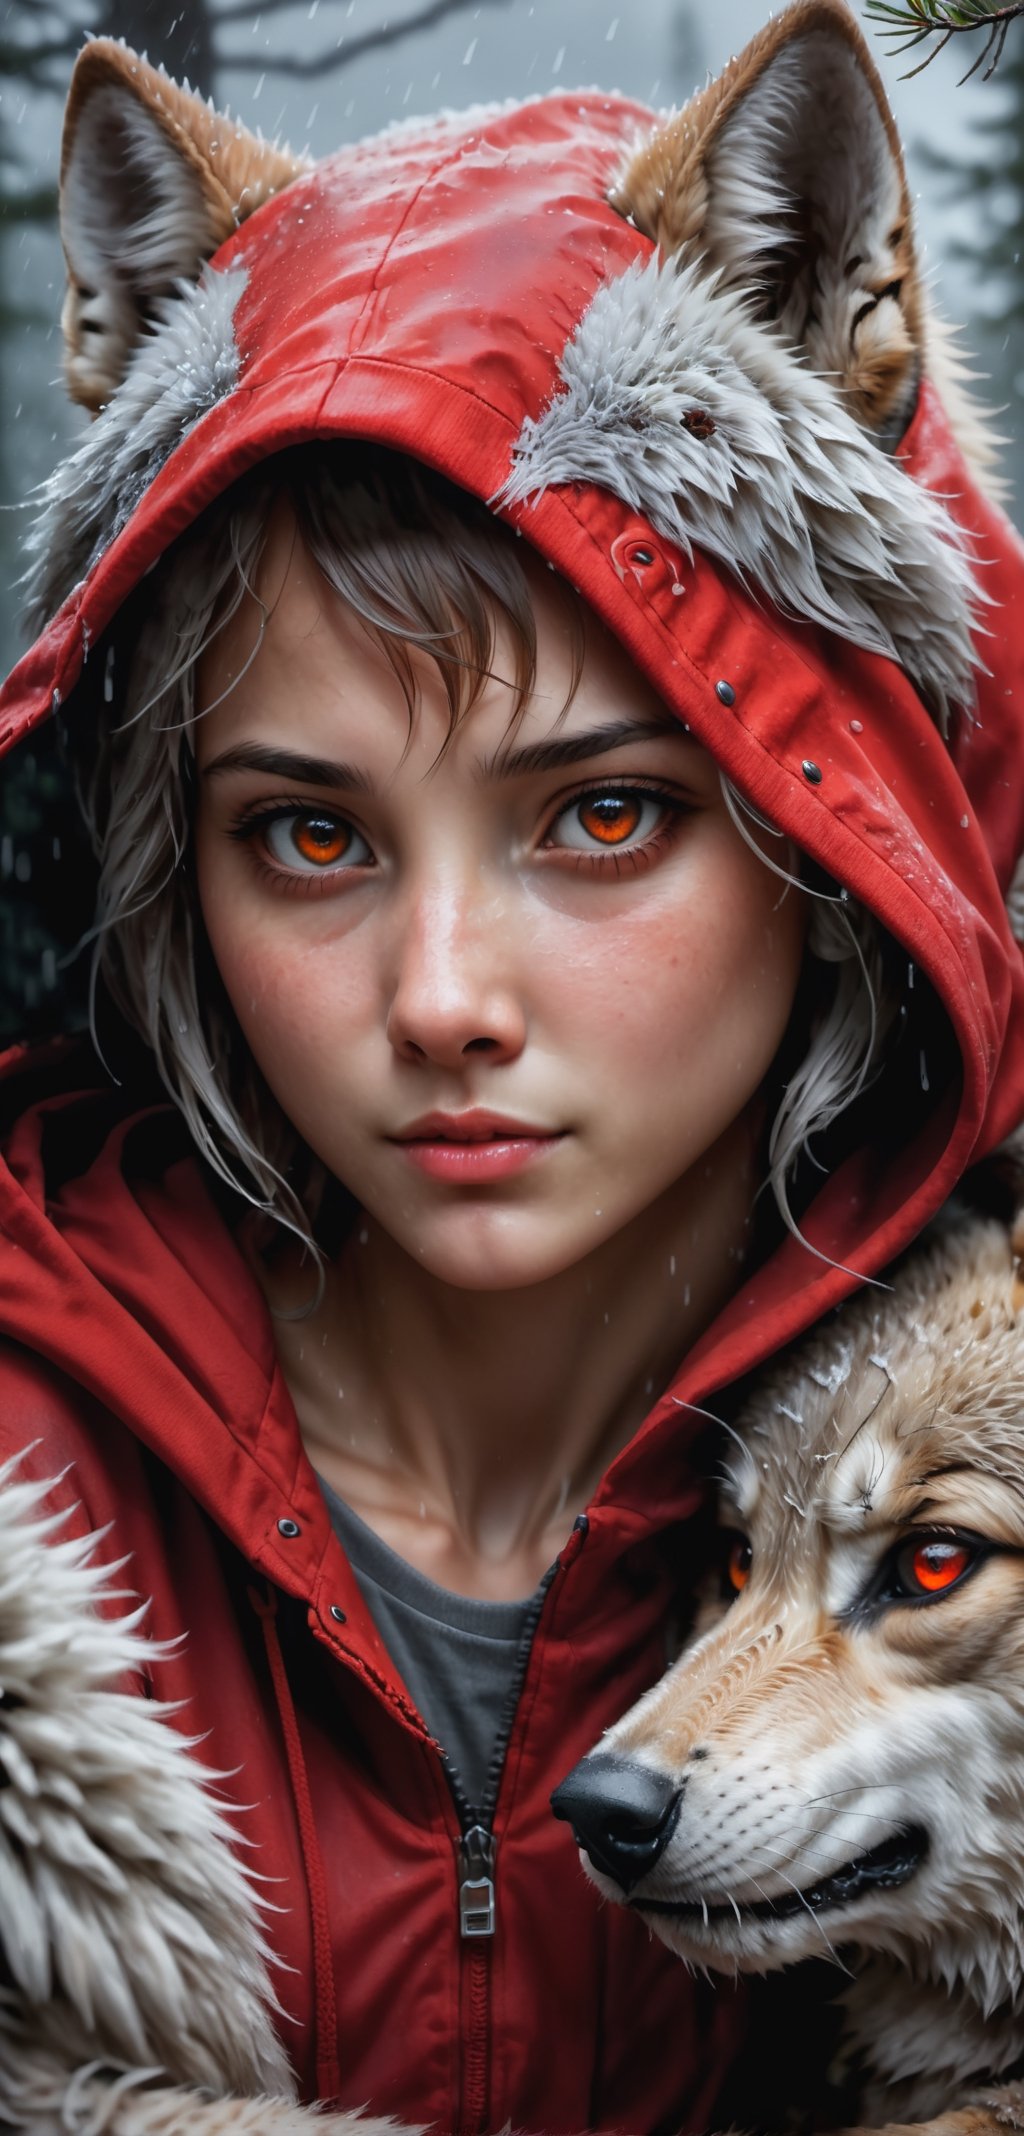 fantasy style, portrait of a shy girl, close-up, extremely beautiful, wearing a red hooded top, beautiful gray eyes, night environment, spring theme, (((hugging the wolf cub))), rain splash, style fantasy, pine trees, stormy dark clouds, fluffy clouds in the background, unreal engine (masterpiece, intricacies, epic details, sharp focus, dramatic and surreal oil painting)